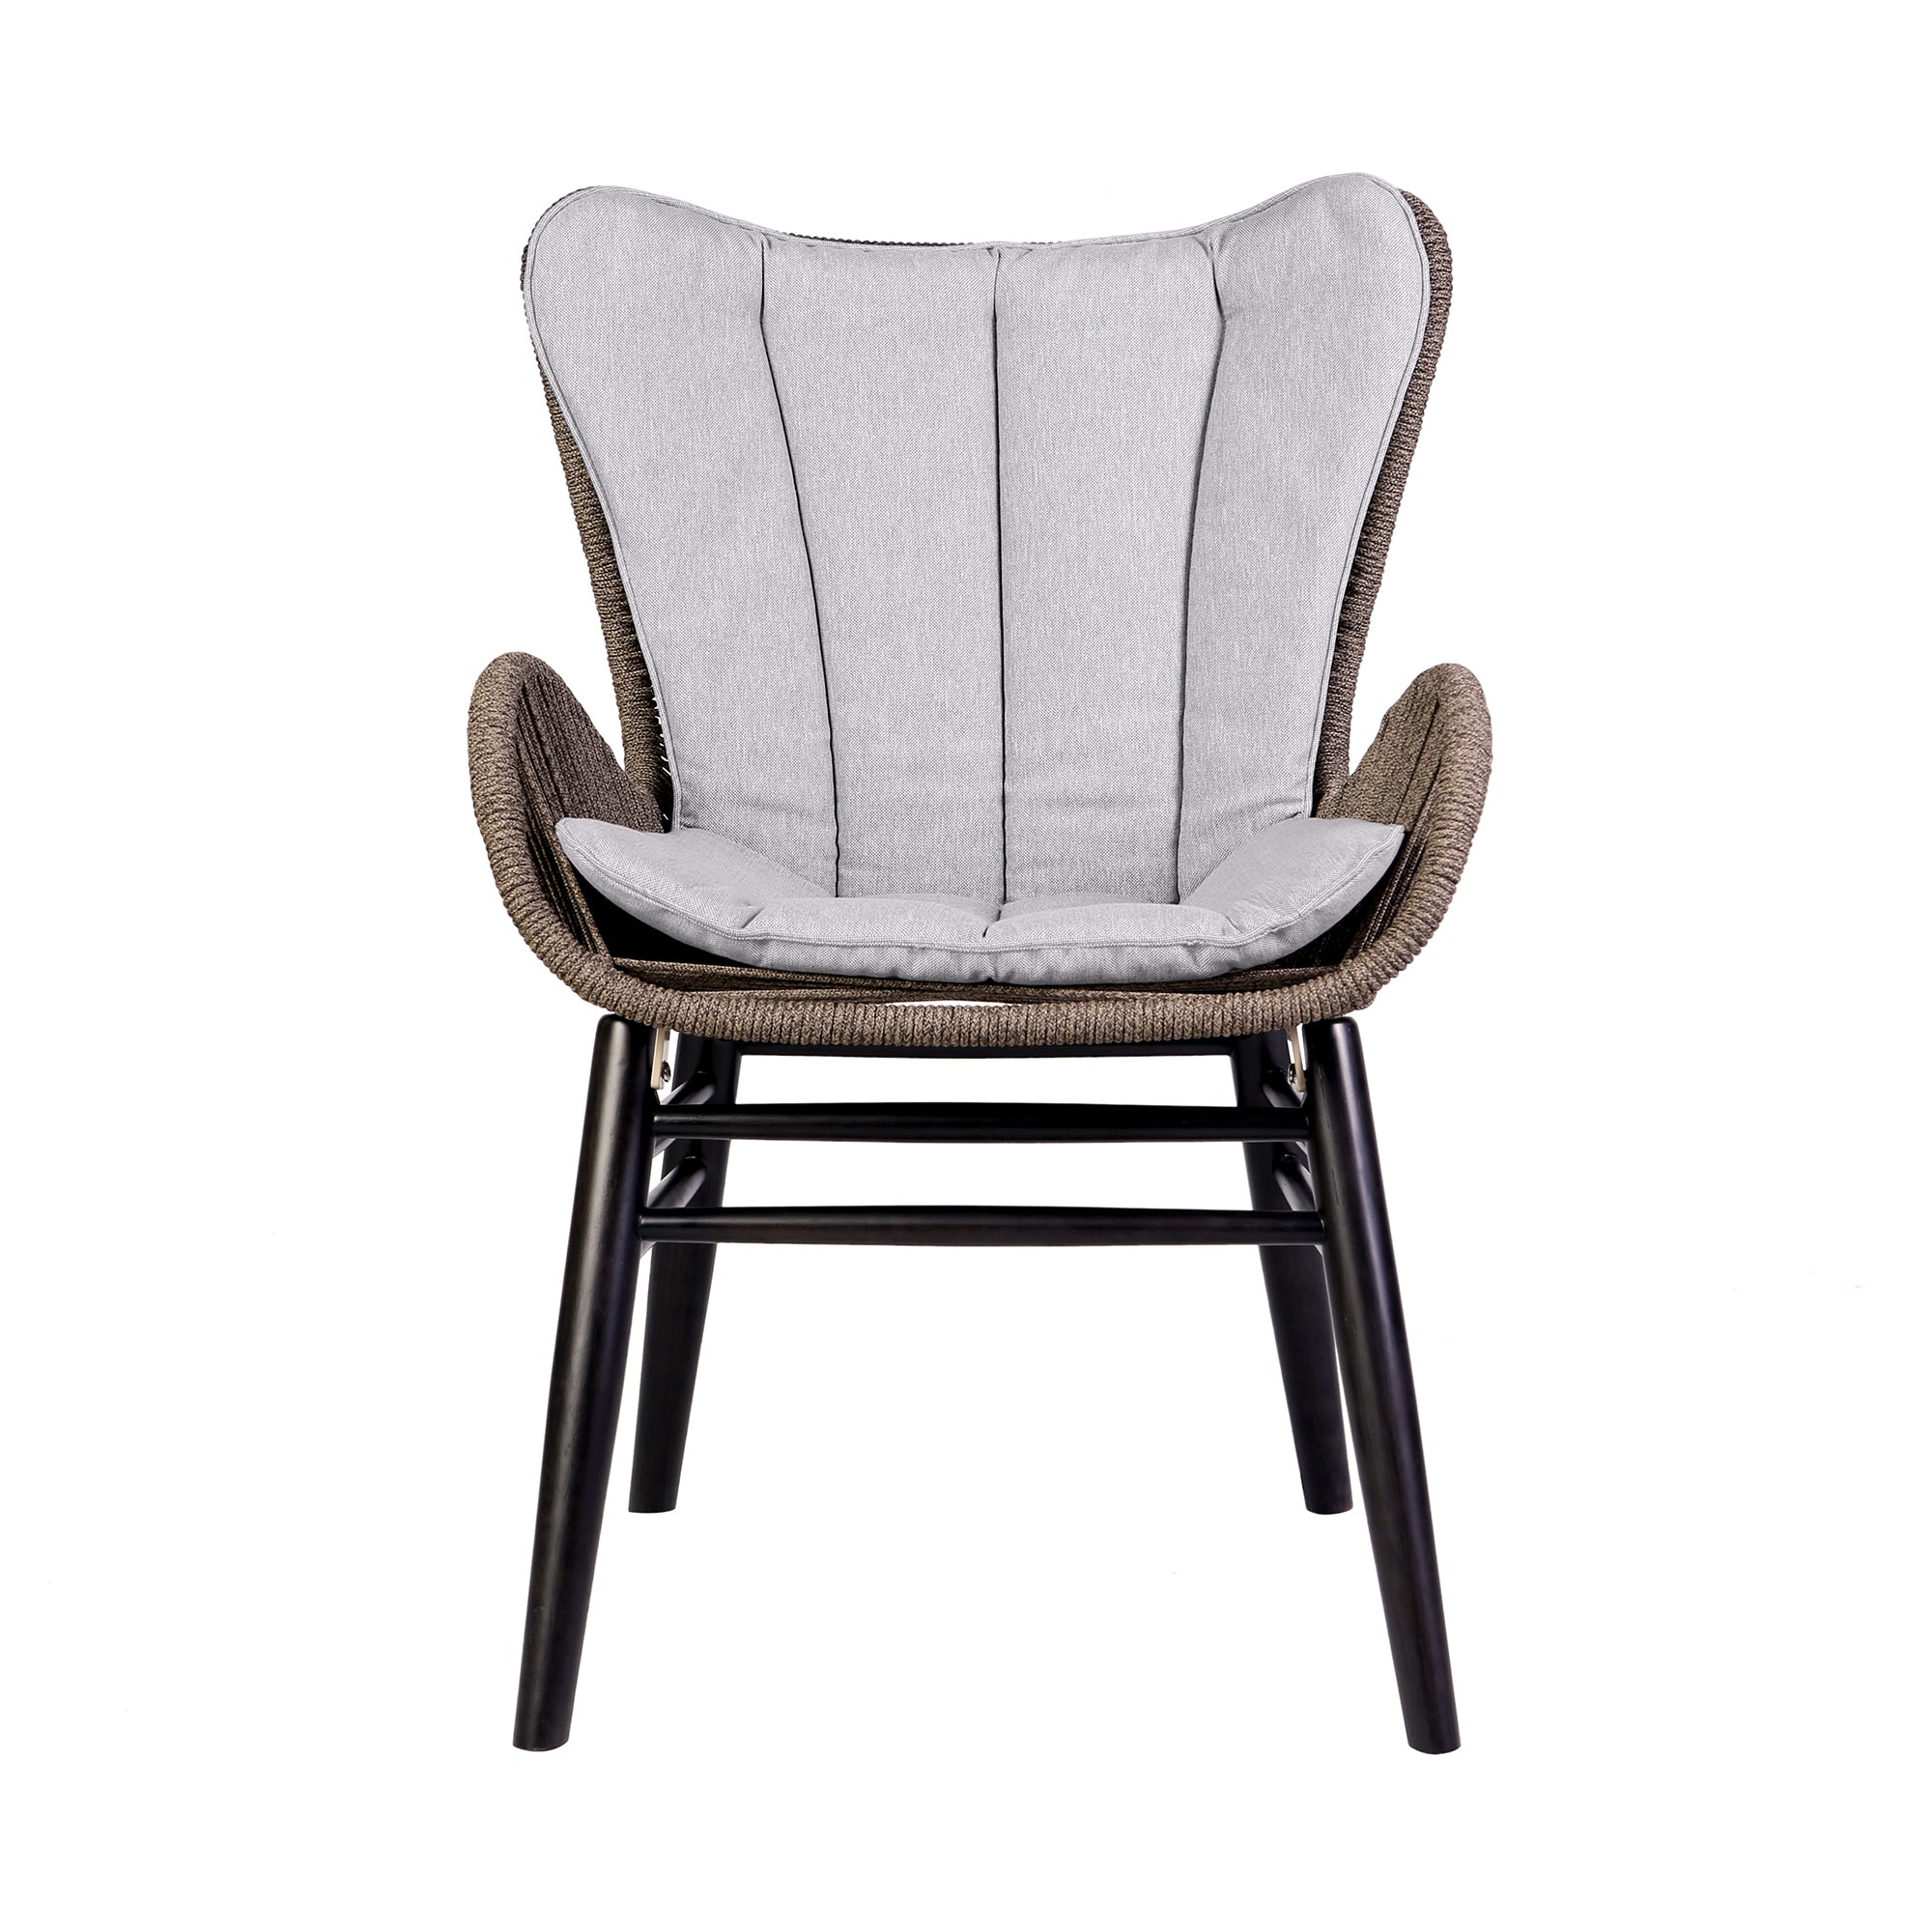 Armen Living - Fanny Outdoor Patio Dining Chair in Eucalyptus Wood and Rope with Grey Cushions - 840254335936